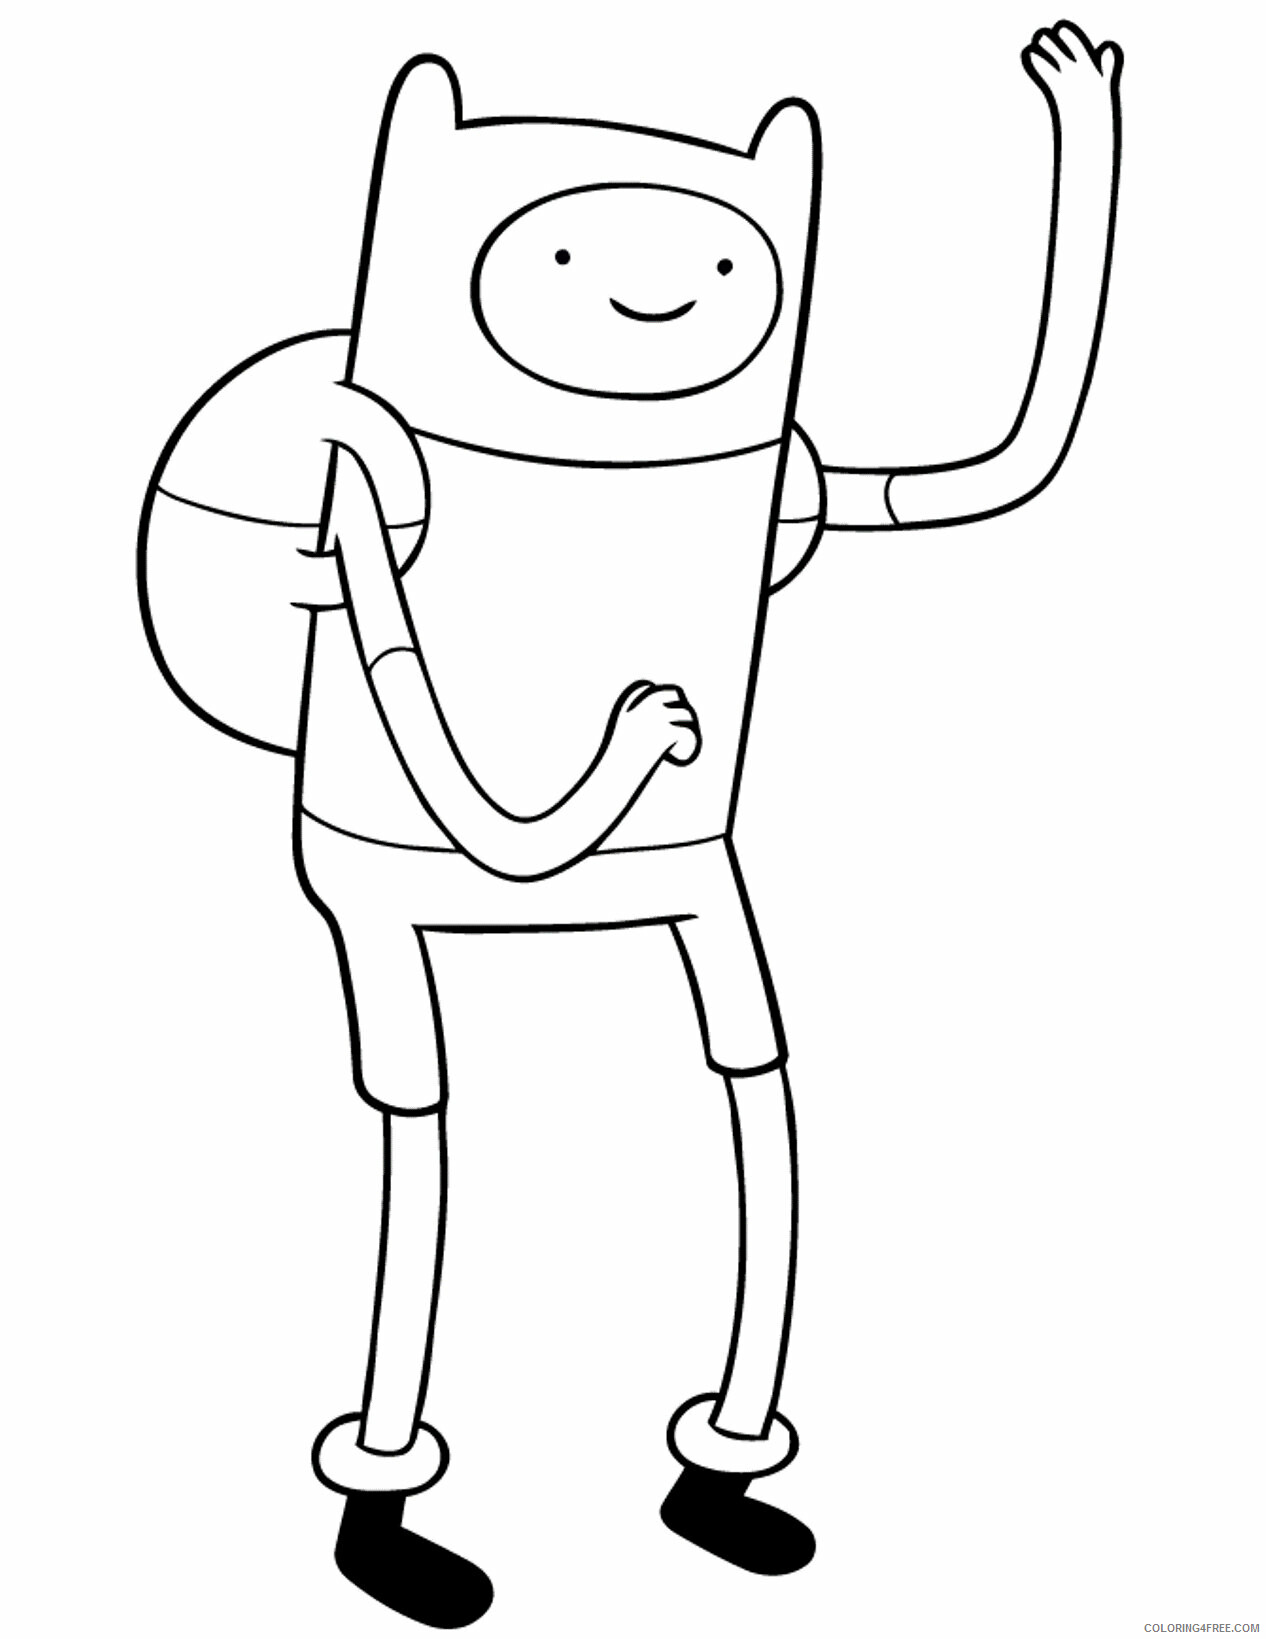 Adventure Time Coloring Pages Online Printable Sheets Adventure Time Finn 2021 a 2639 Coloring4free